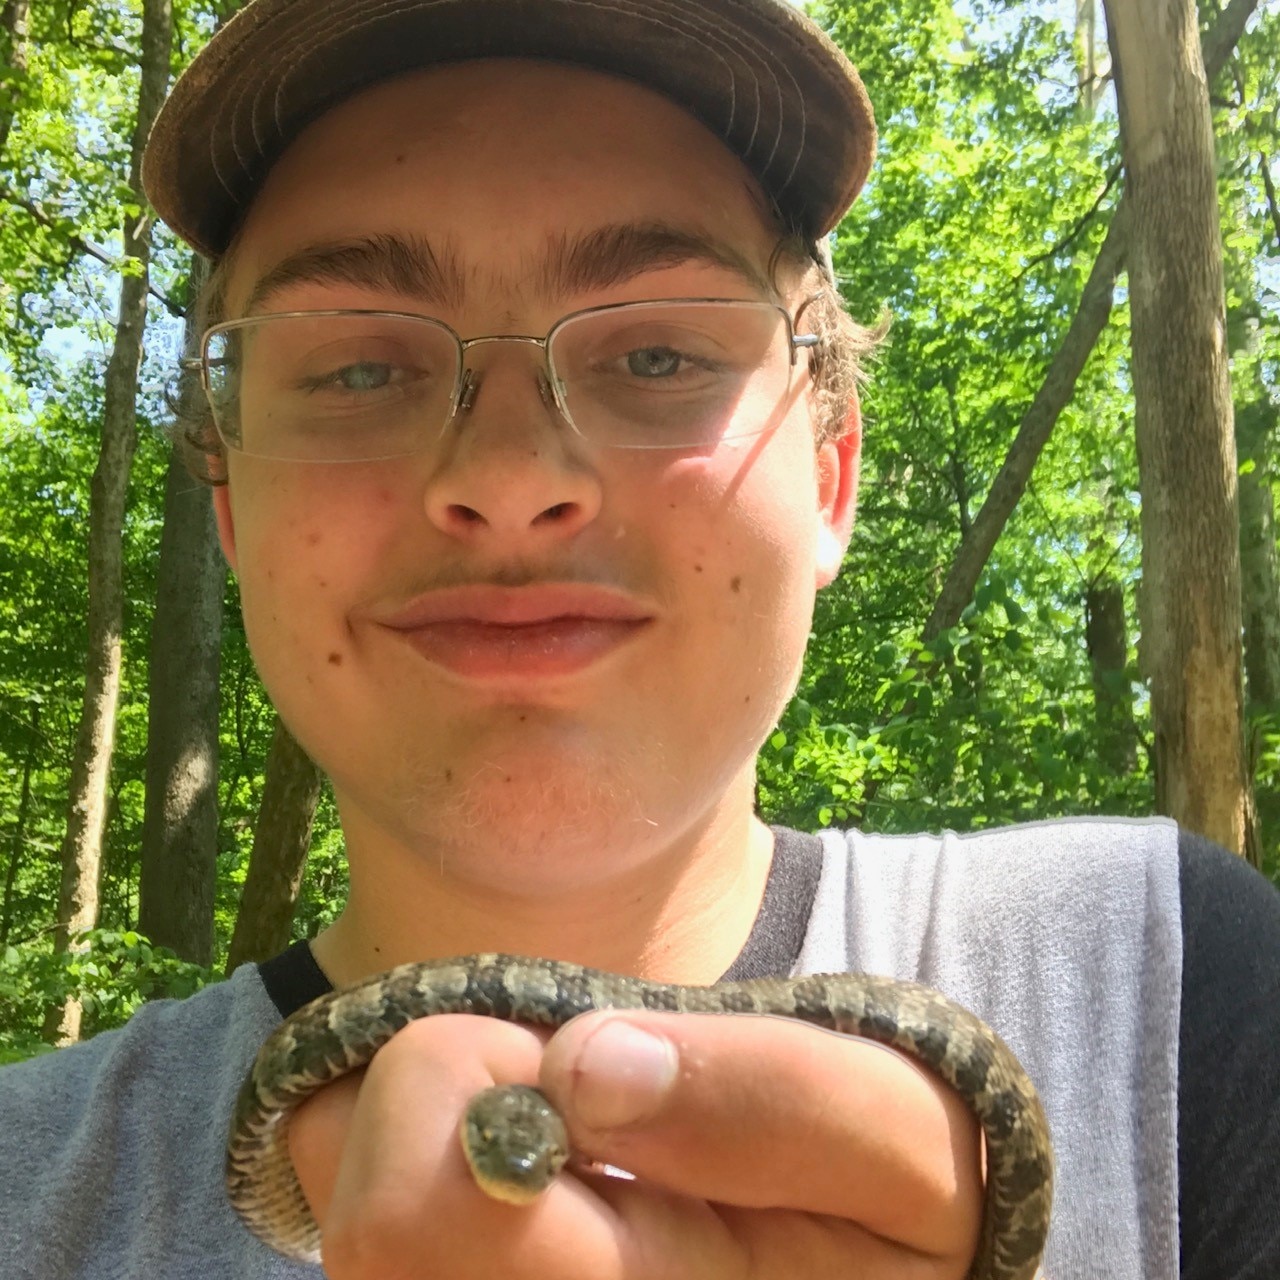 A teenage boy wearing a brimmed-hat, glasses, and a grey shirt smirks at the camera while holding a small snake in his hand.